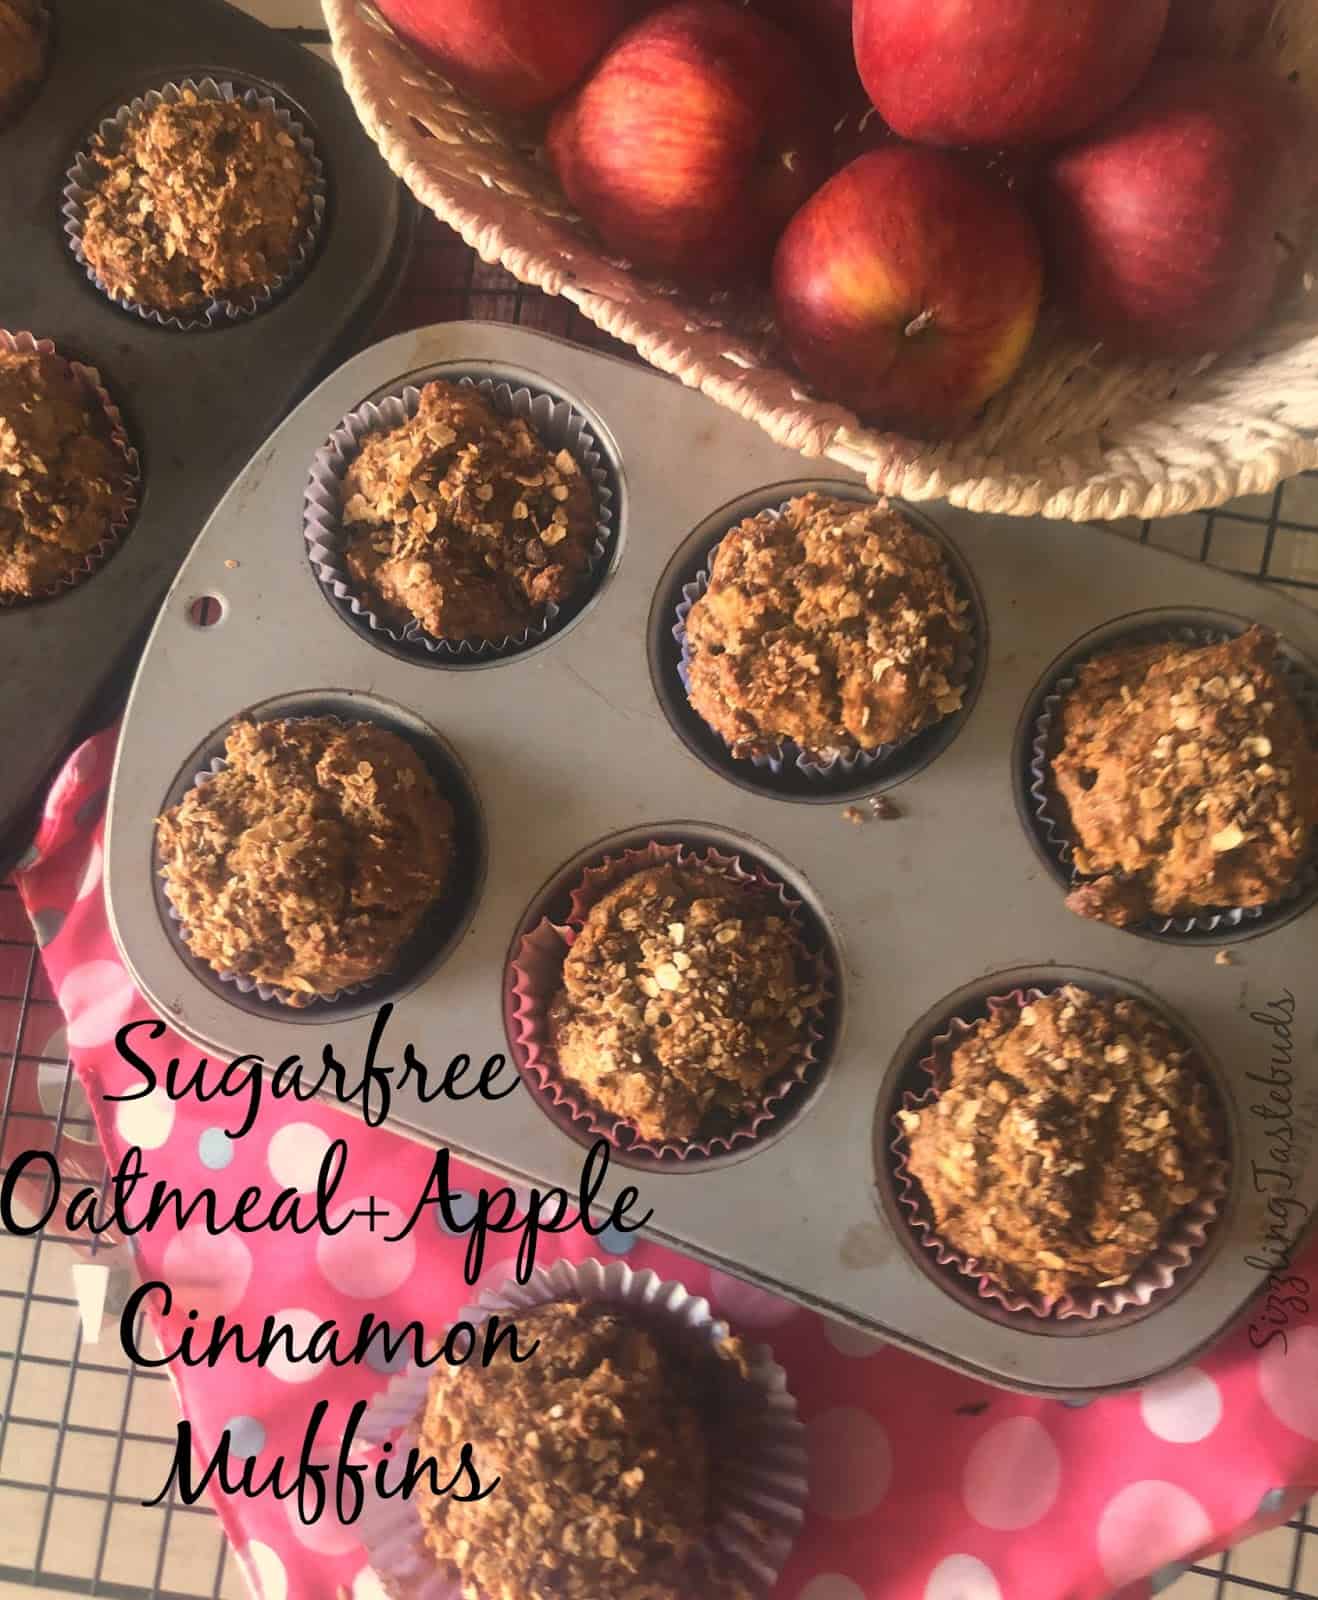 A healthy and Sugarfree and Eggless muffin for breakfast / snack made with Apples, cinnamon and Oats